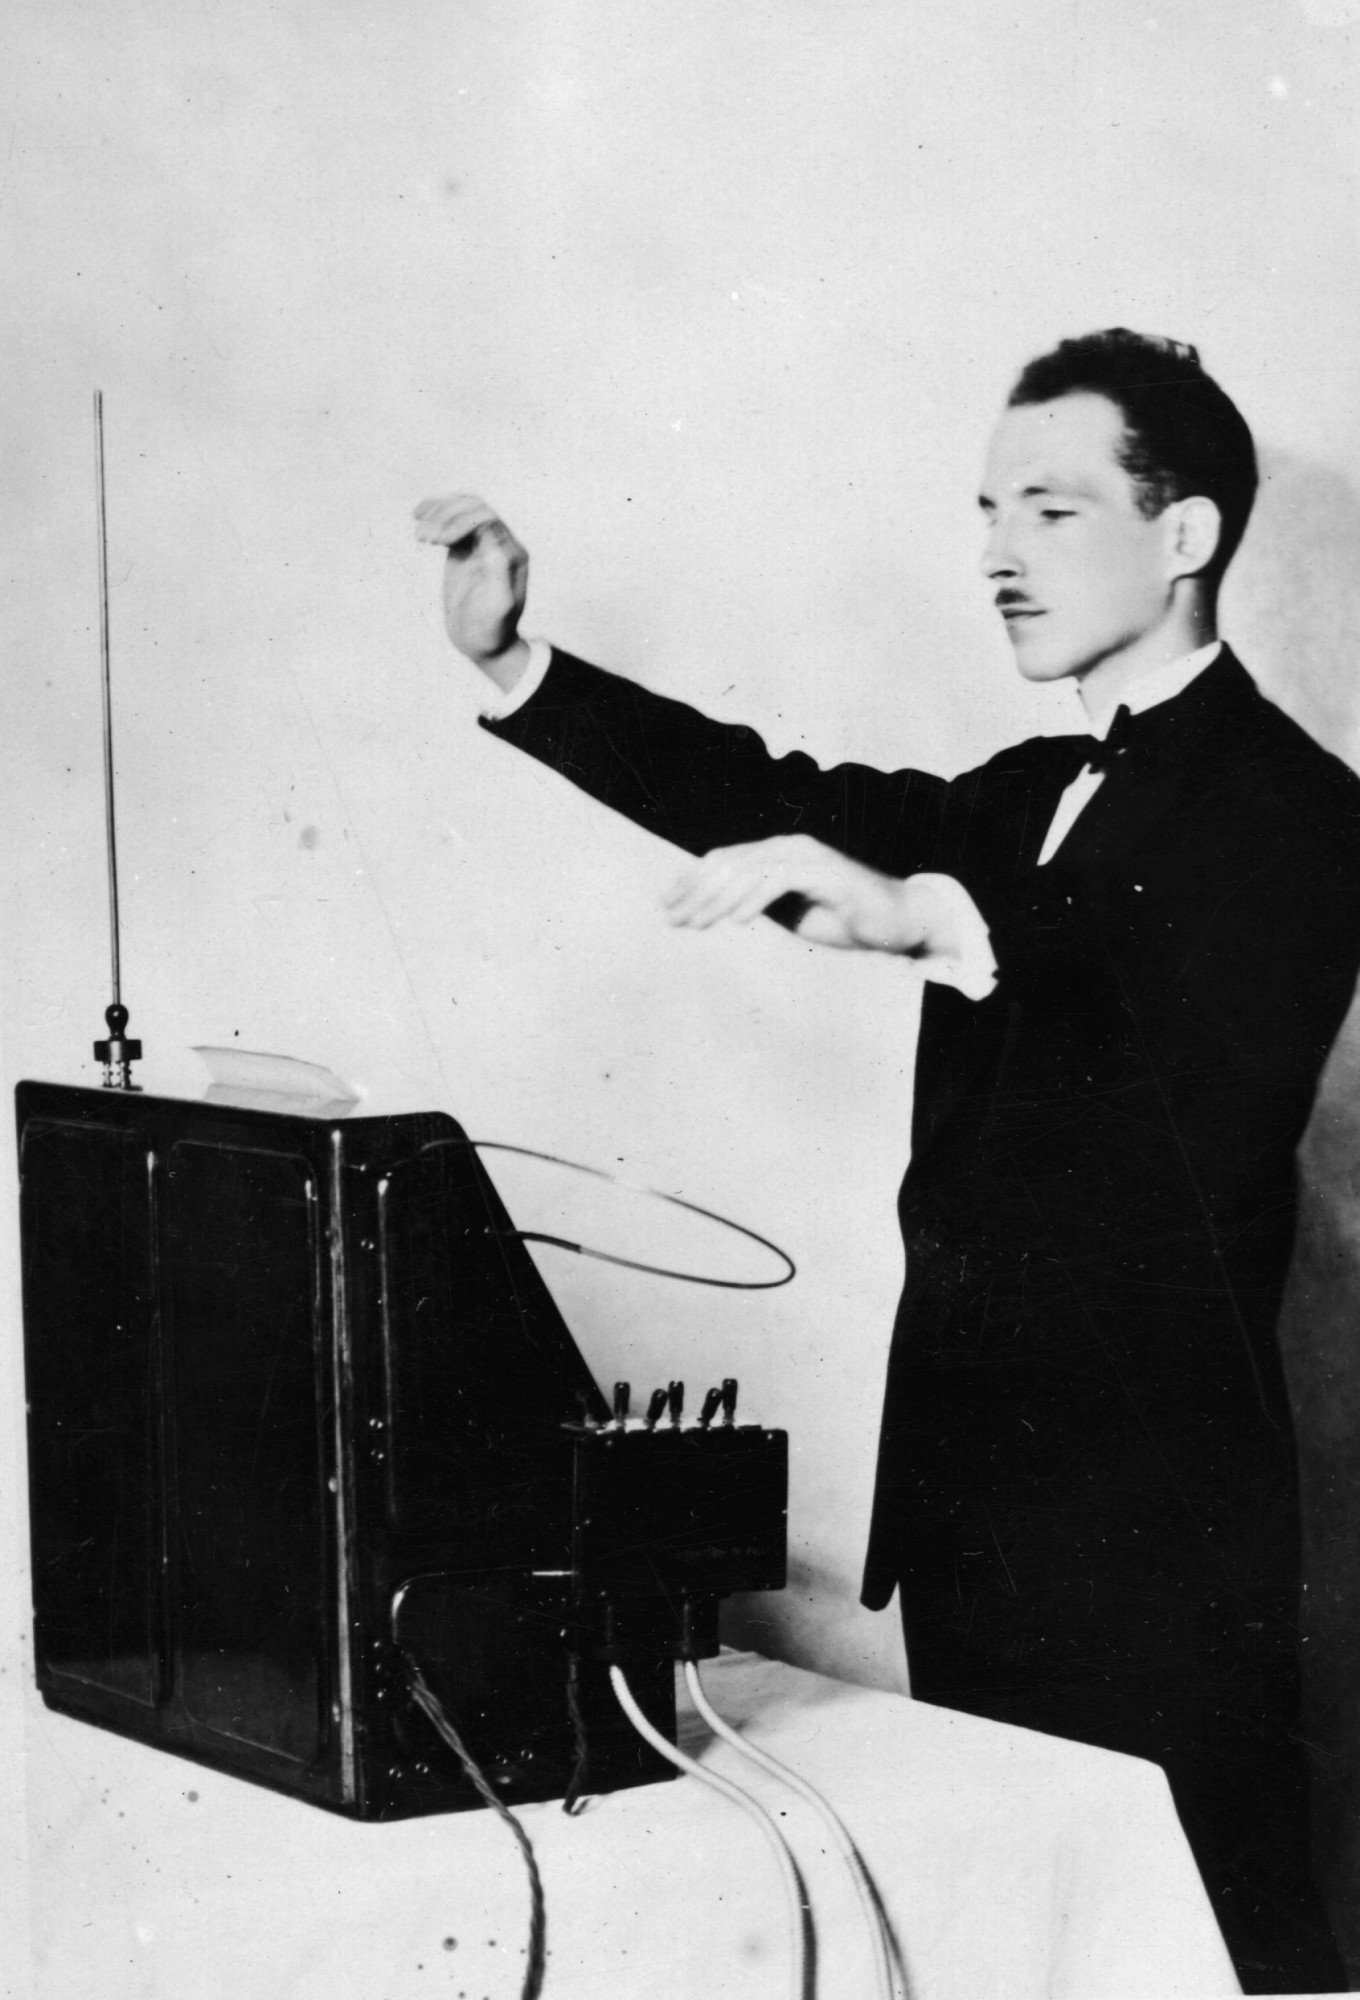 12th December 1927: Professor Leon Theremin demonstrating his theremin. The theremin was the world's first electronic musical instrument. It is played without actually touching any part of the instrument. Film scores of the 40s and 50s used the instrument to eerie effect and it makes a famous appearance in the chorus of the Beach Boys hit 'Good Vibrations'. (Photo by Topical Press Agency/Getty Images)